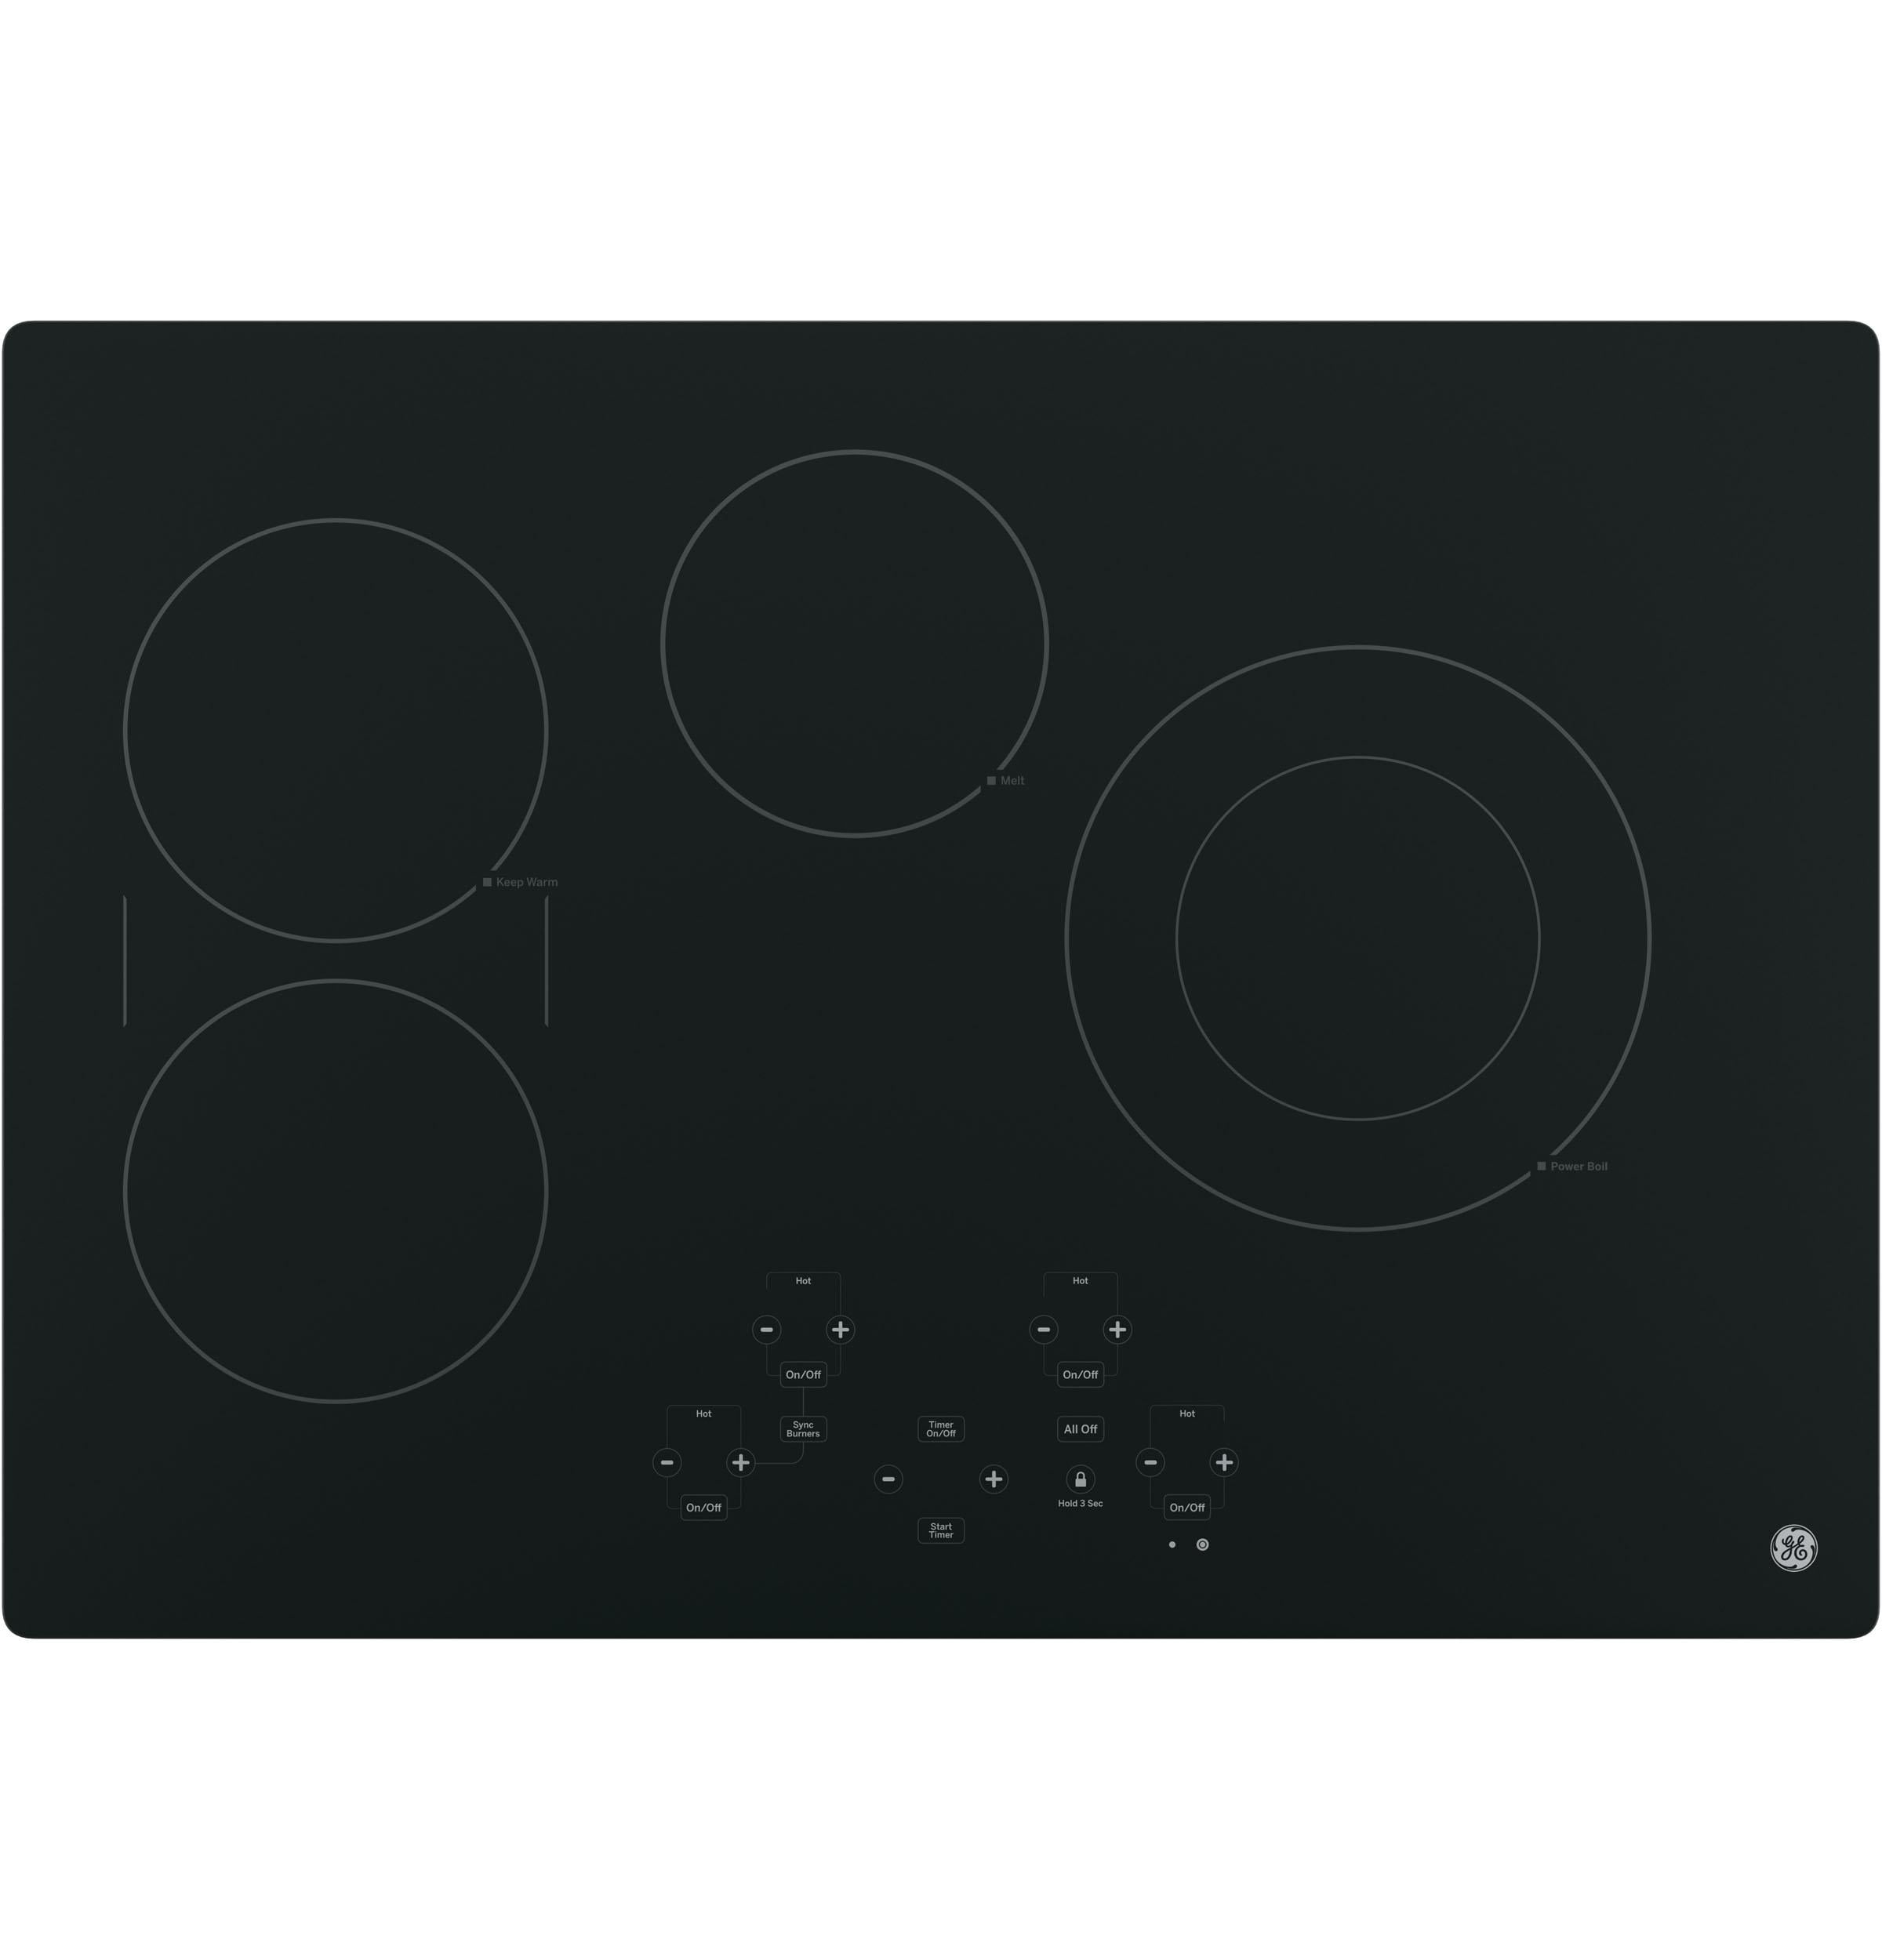 Keep Warm Knob Controls Fits Guarantee and ADA Compliant GE JP3536SJSS 36 Inch Smoothtop Electric Cooktop with Dual-Size Powers Melt 5 Radiant Elements 